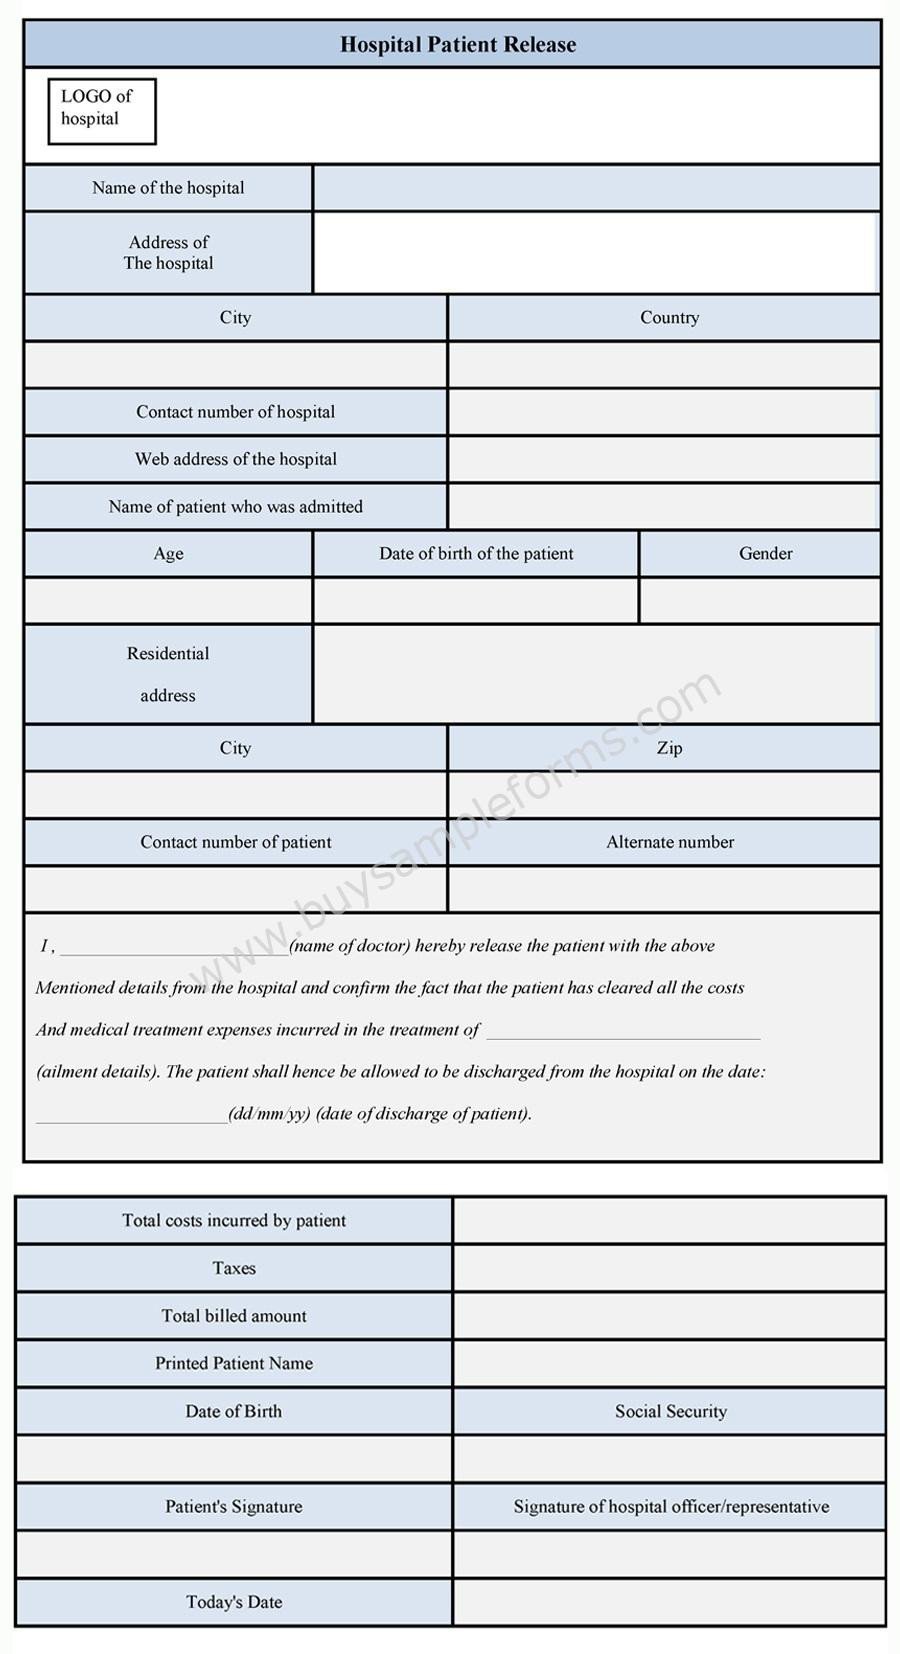 Hospital Release form Template Hospital Patient Release form Sample forms